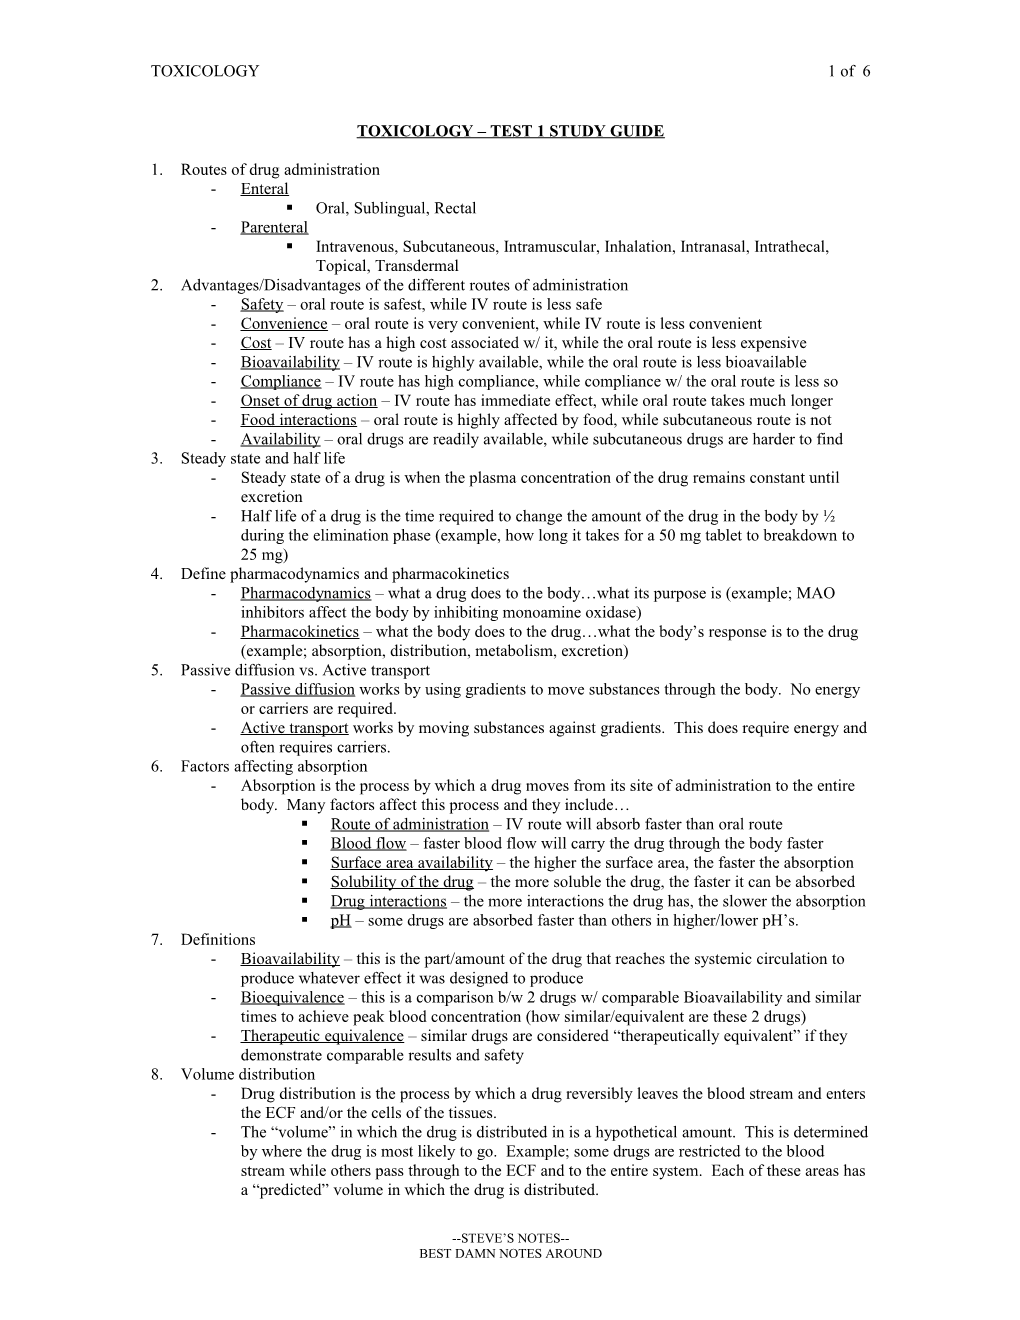 Toxicology Test 1 Study Guide